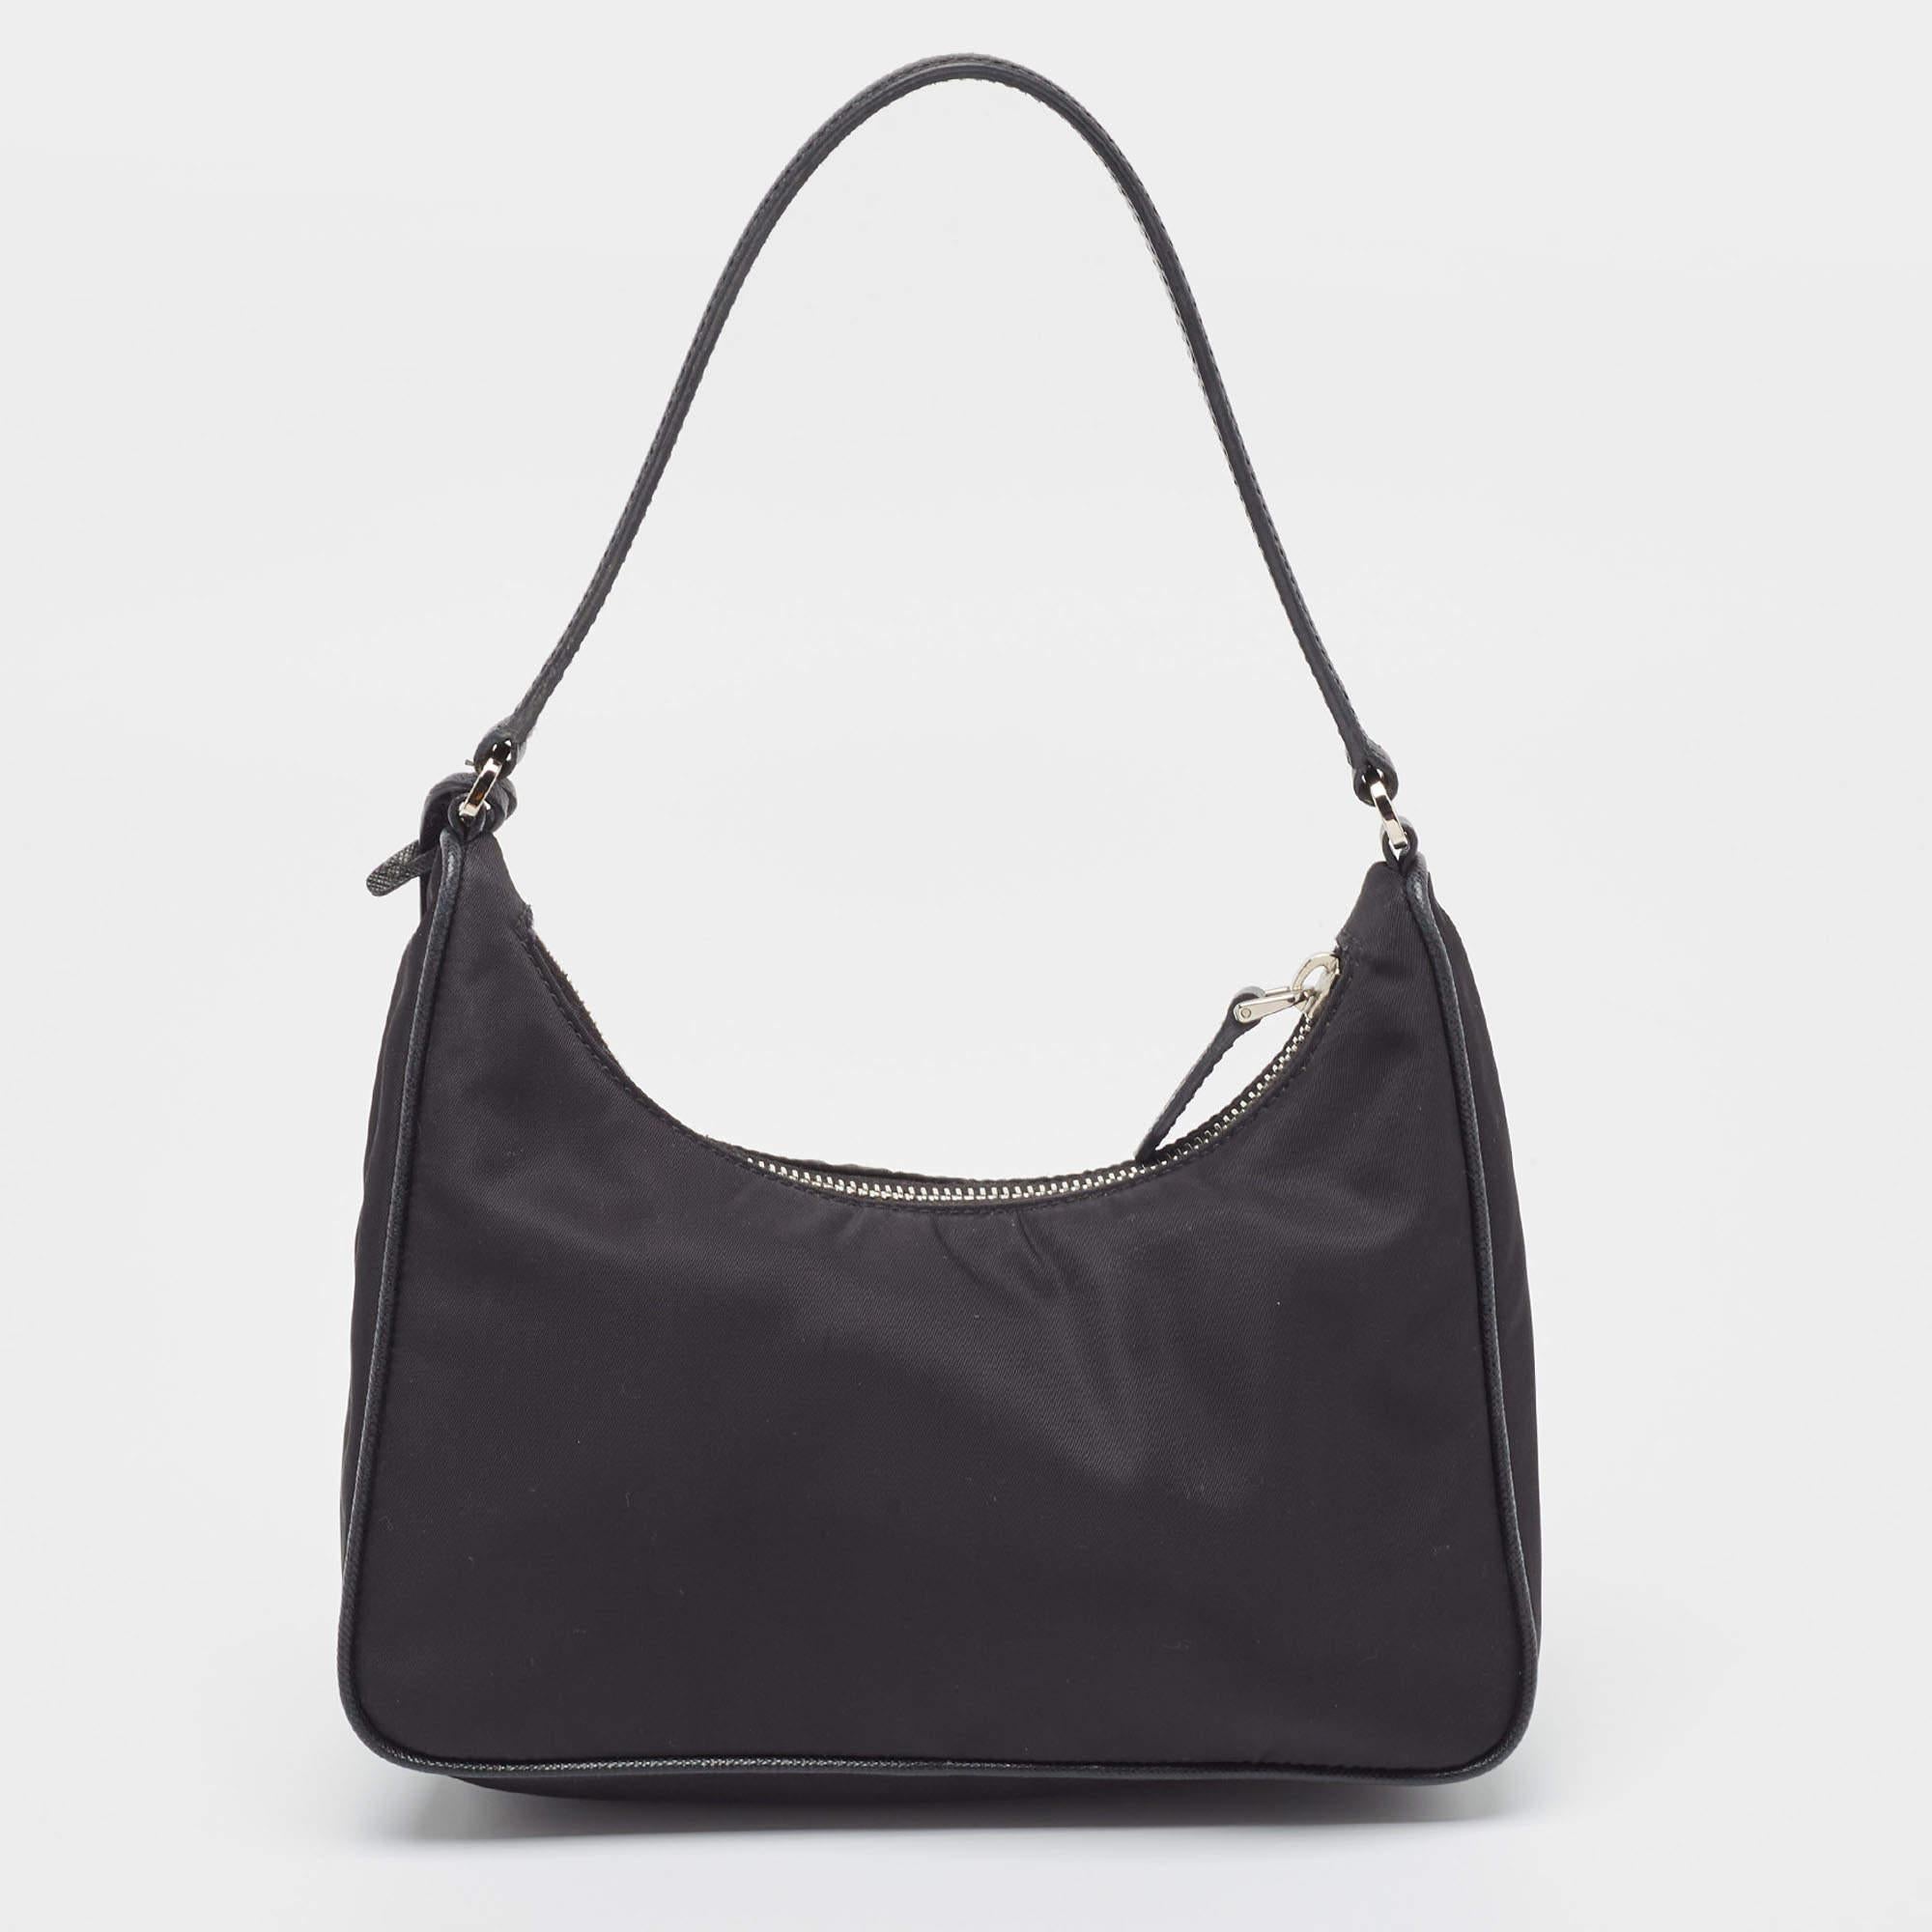 The petite silhouette and classic elements made the Prada Re-Edition 2005 bag an instant hit among fashionistas. Inspired by the classic mini hobo bag, this black creation comes made from nylon and features a pouch attached to the single handle at